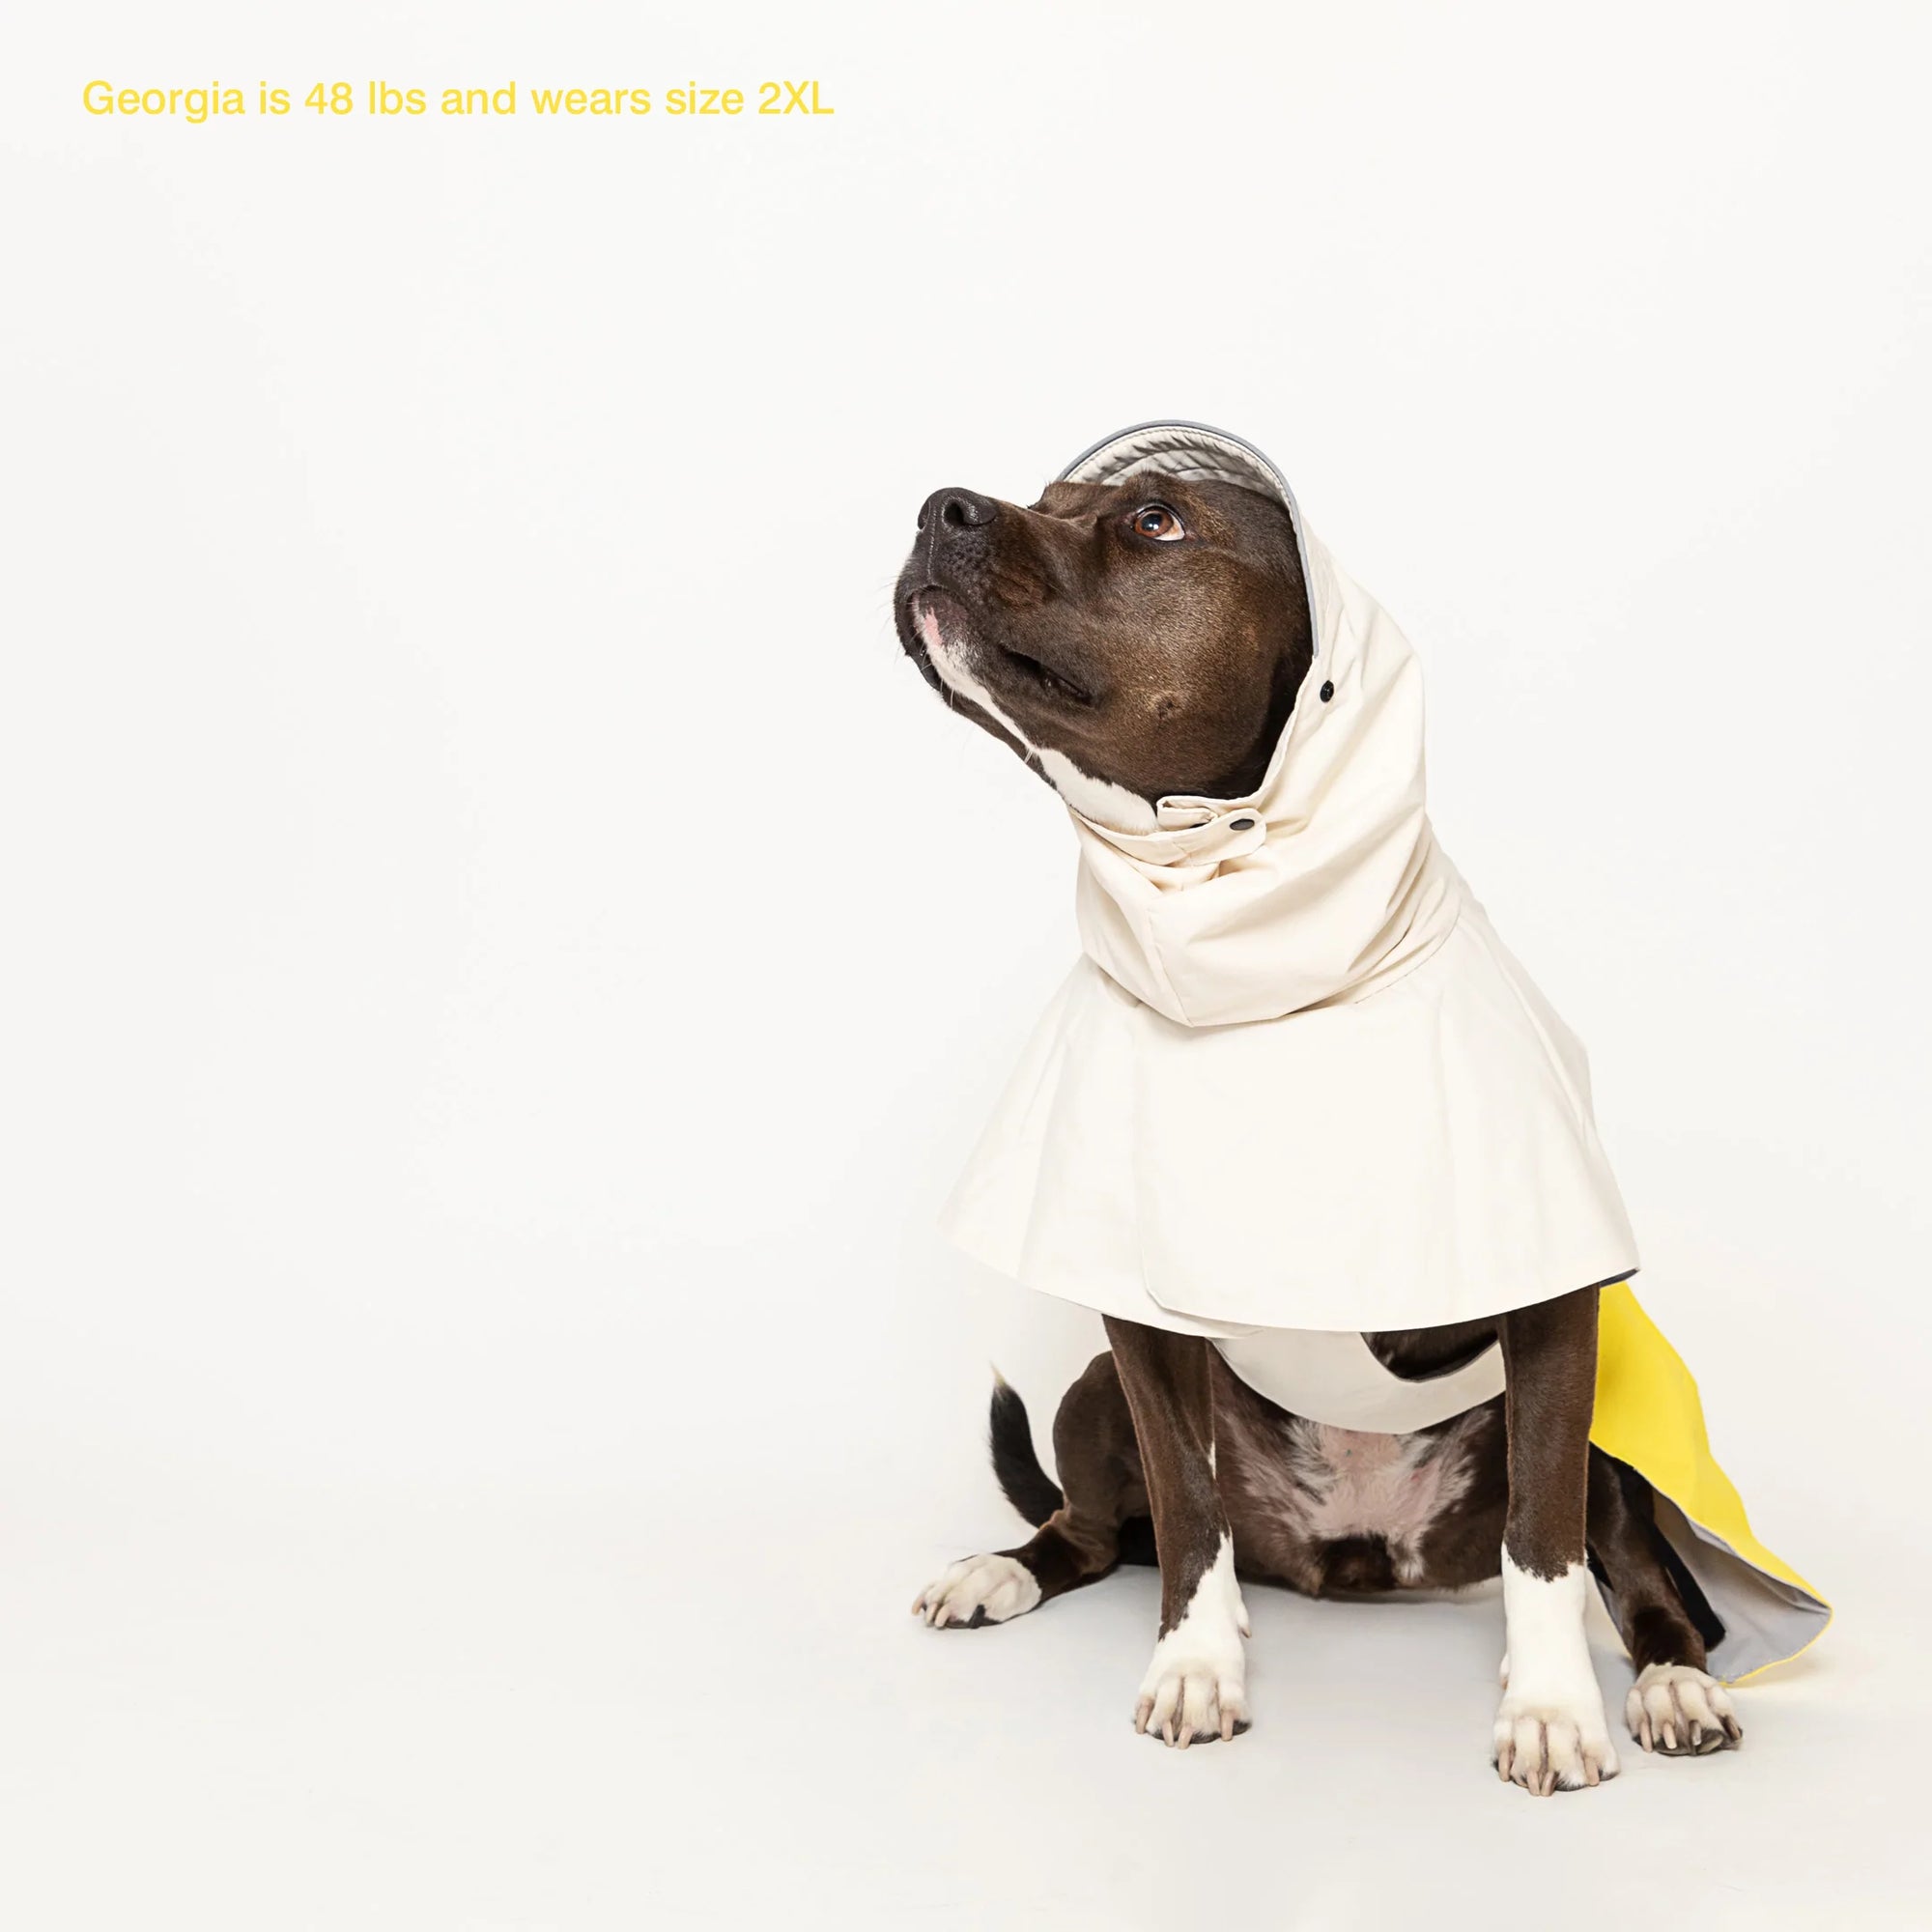 Georgia, a 48 lb dog, proudly wears her size 2XL raincoat.